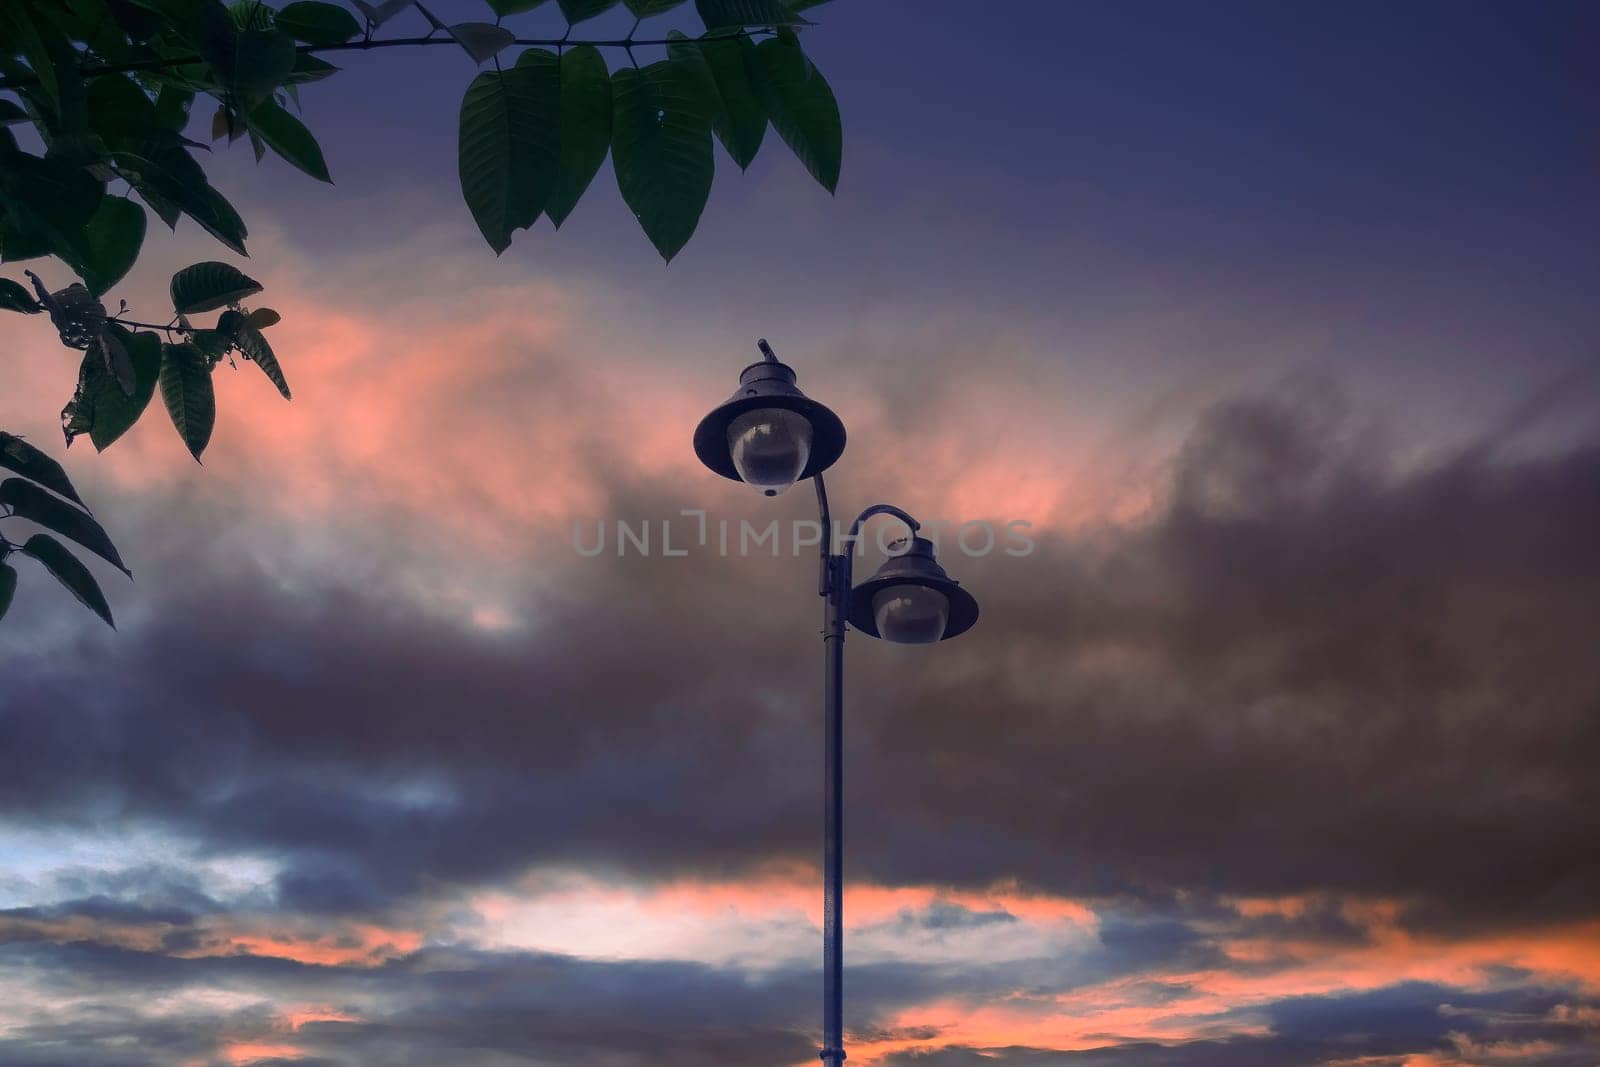 A black street lamp with two curved arms and round lamps stands out against a colorful sky of orange, pink, and purple clouds. A tree branch frames the top left corner of the image. High quality photo